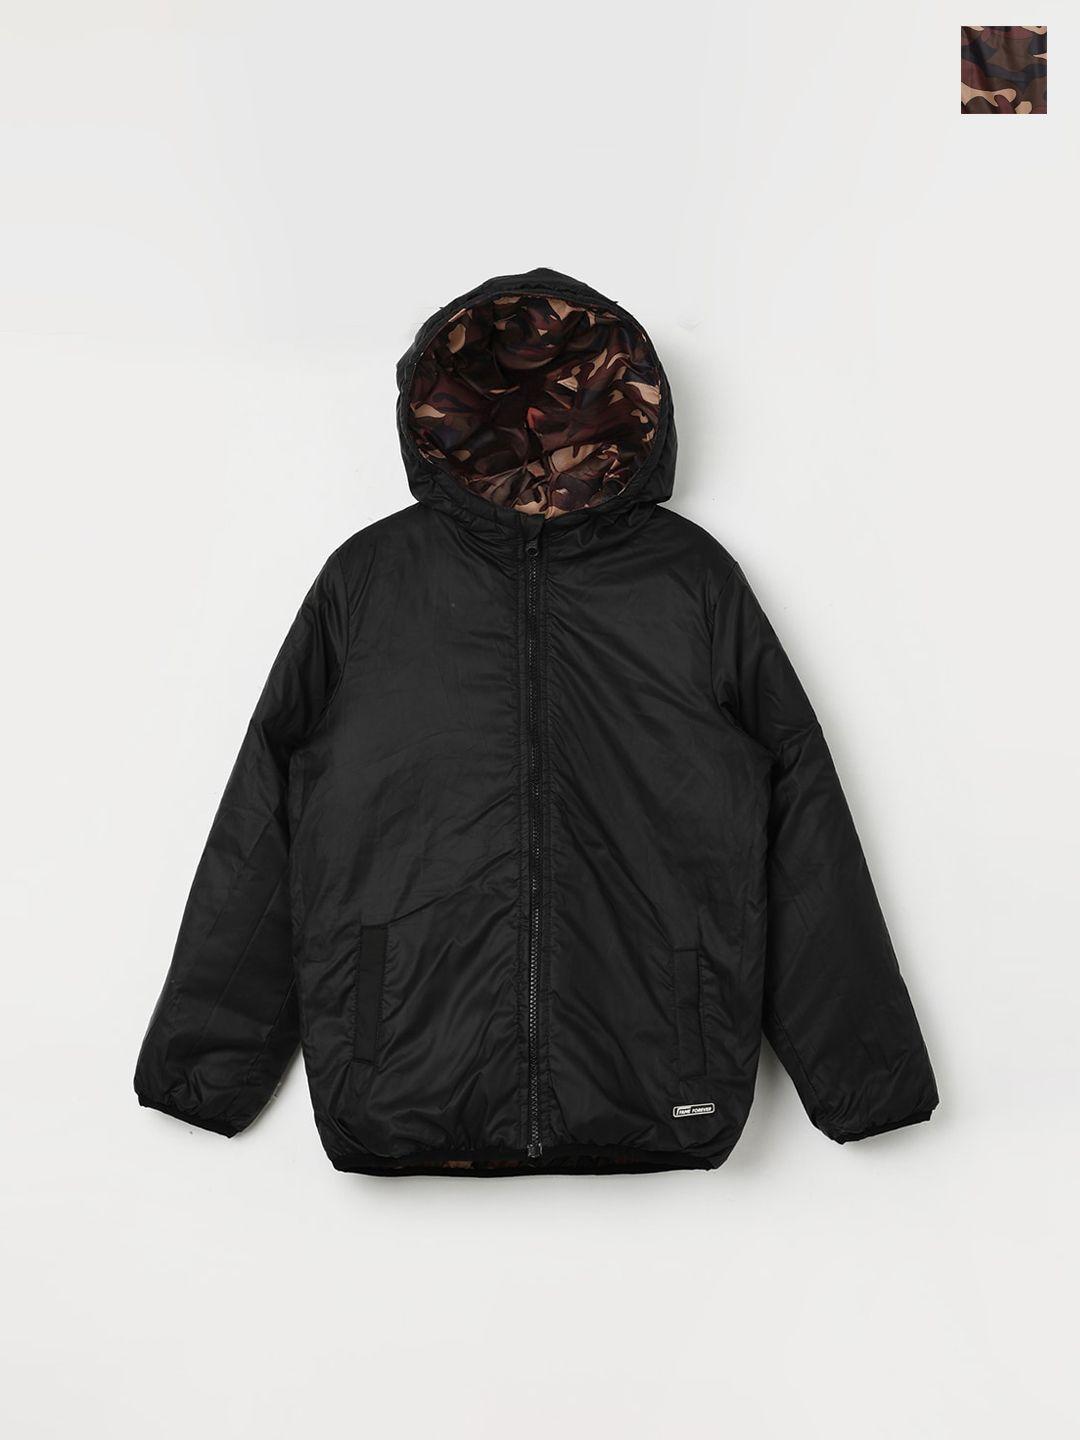 fame-forever-by-lifestyle-boys-camouflage-reversible-bomber-jacket